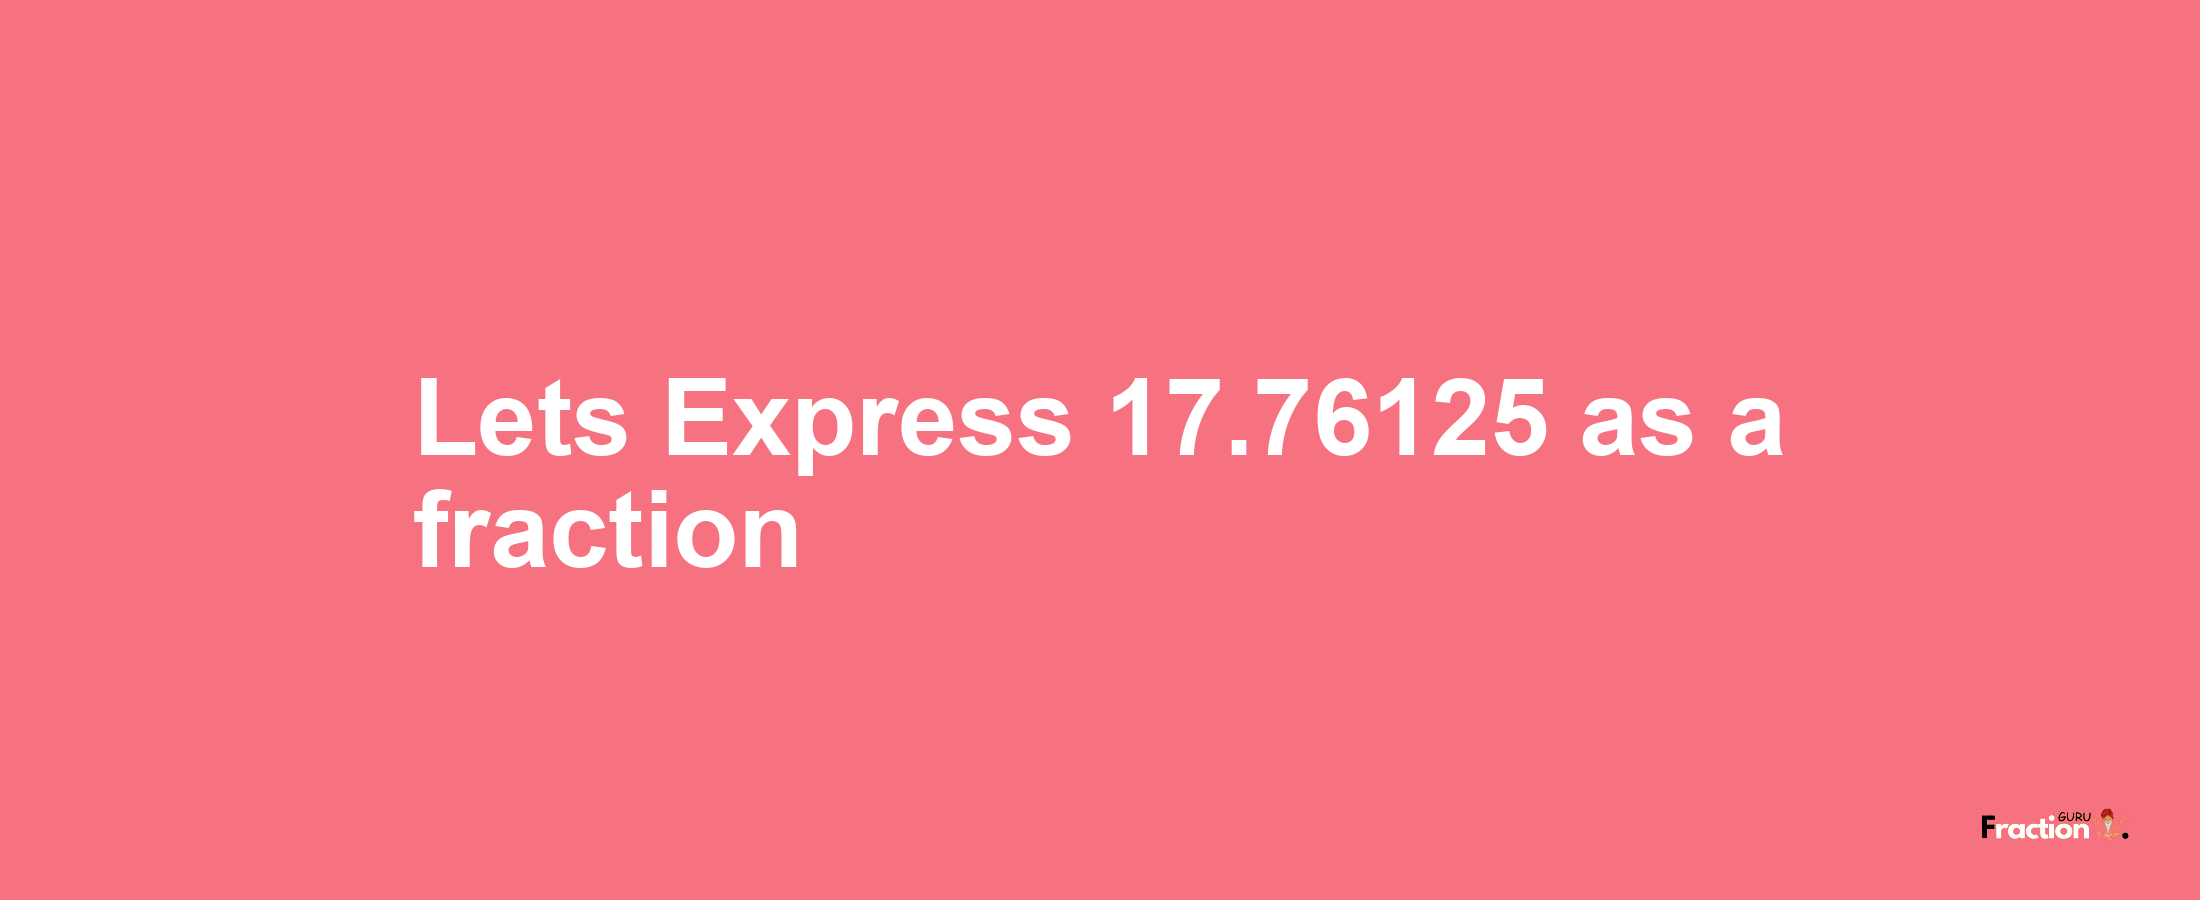 Lets Express 17.76125 as afraction